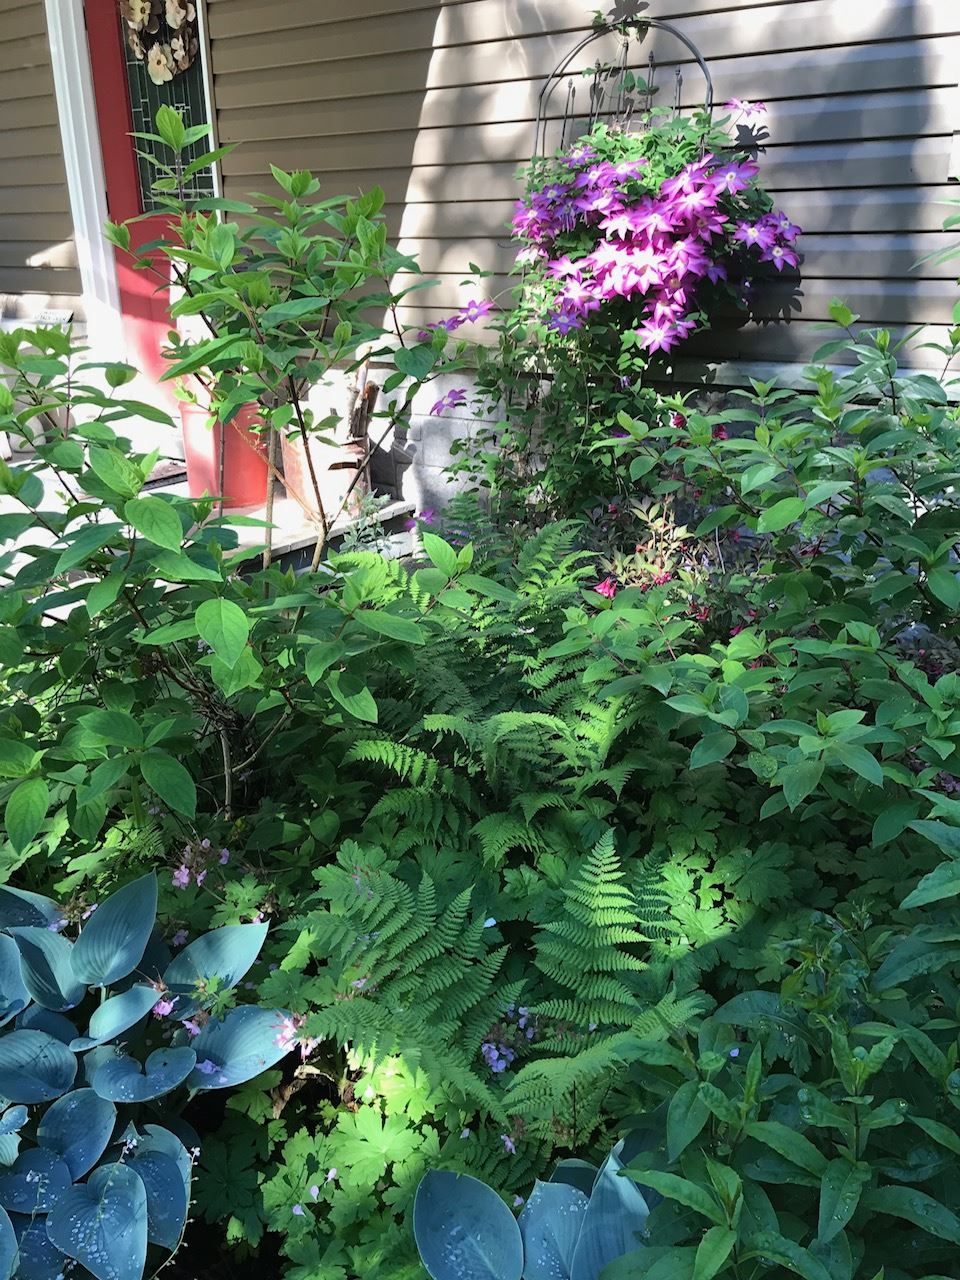 garden bed full of ferns and other foliage plants